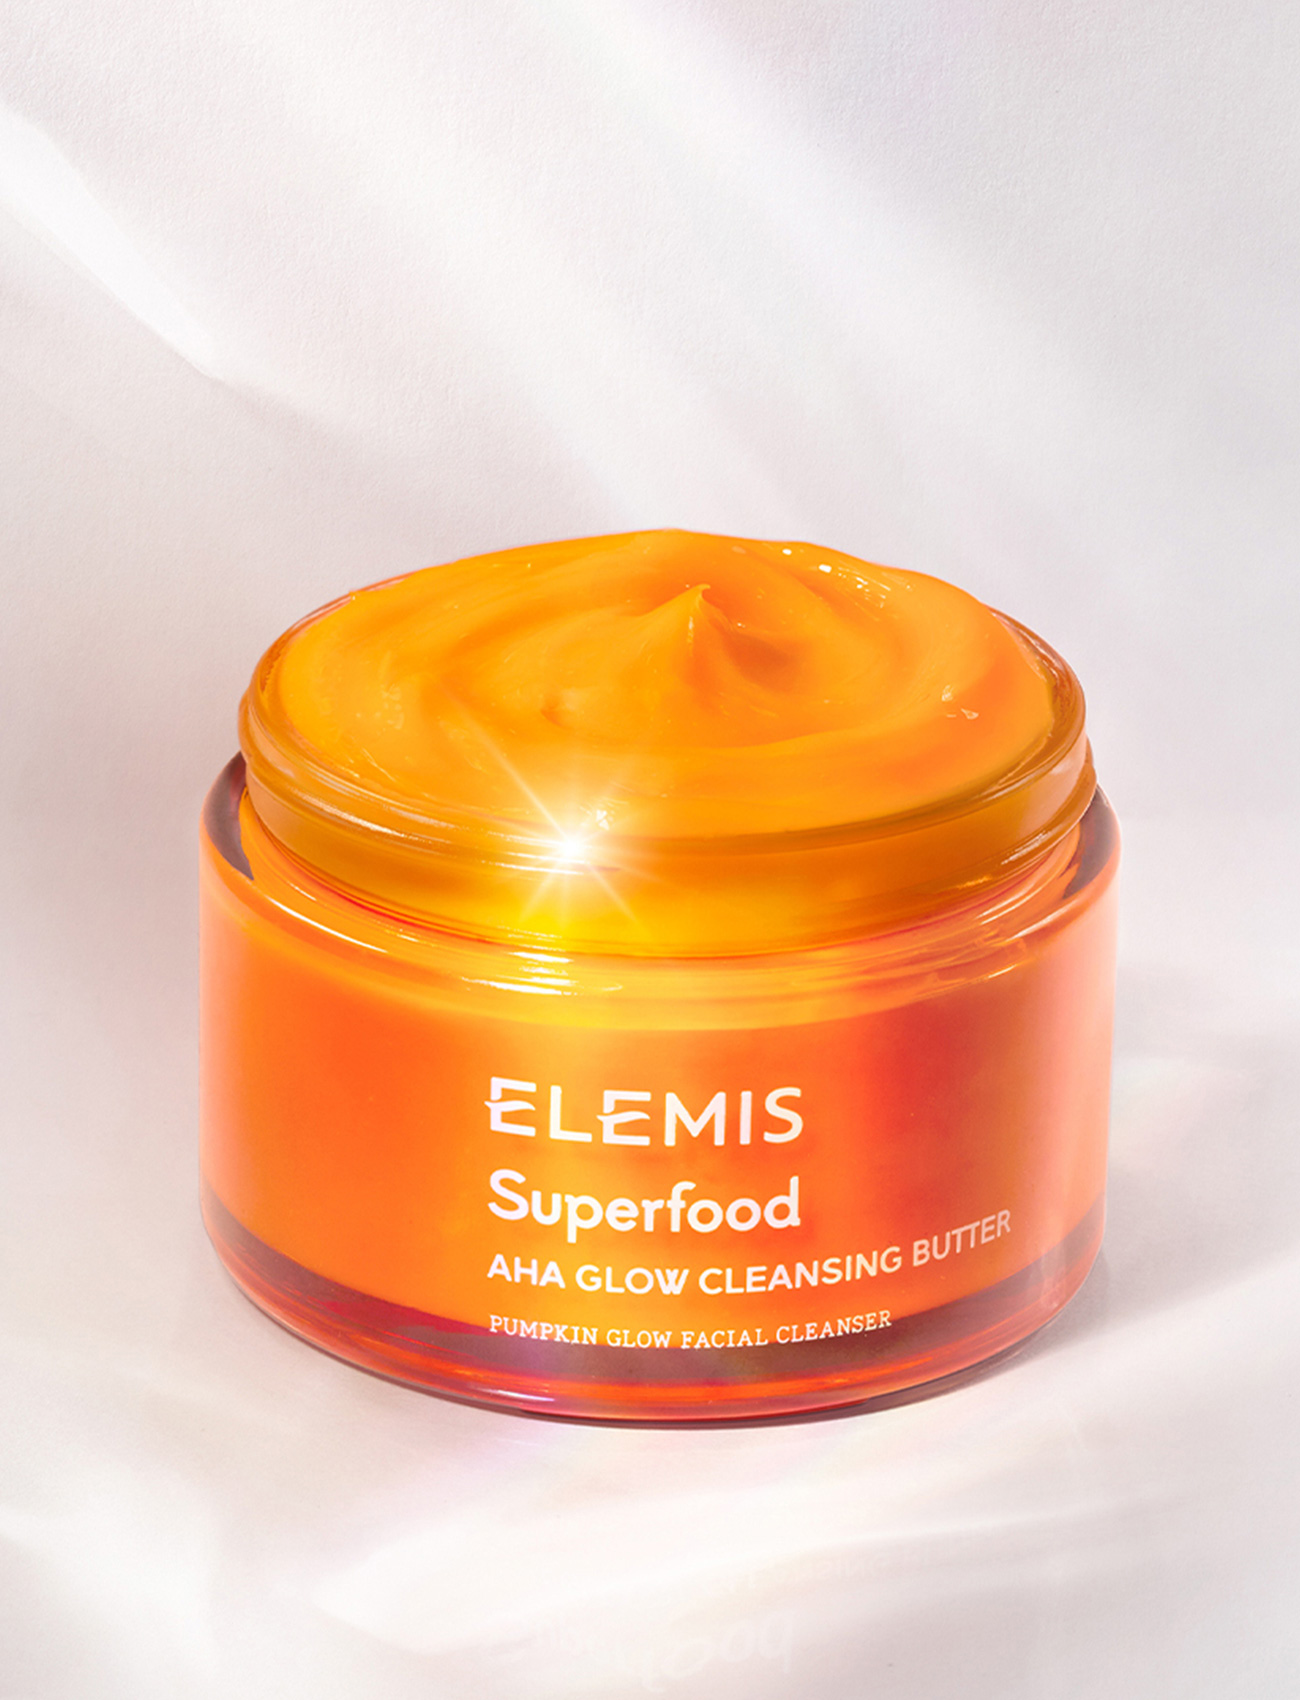 Elemis Superfood AHA Glow Cleansing Butter 90 ml